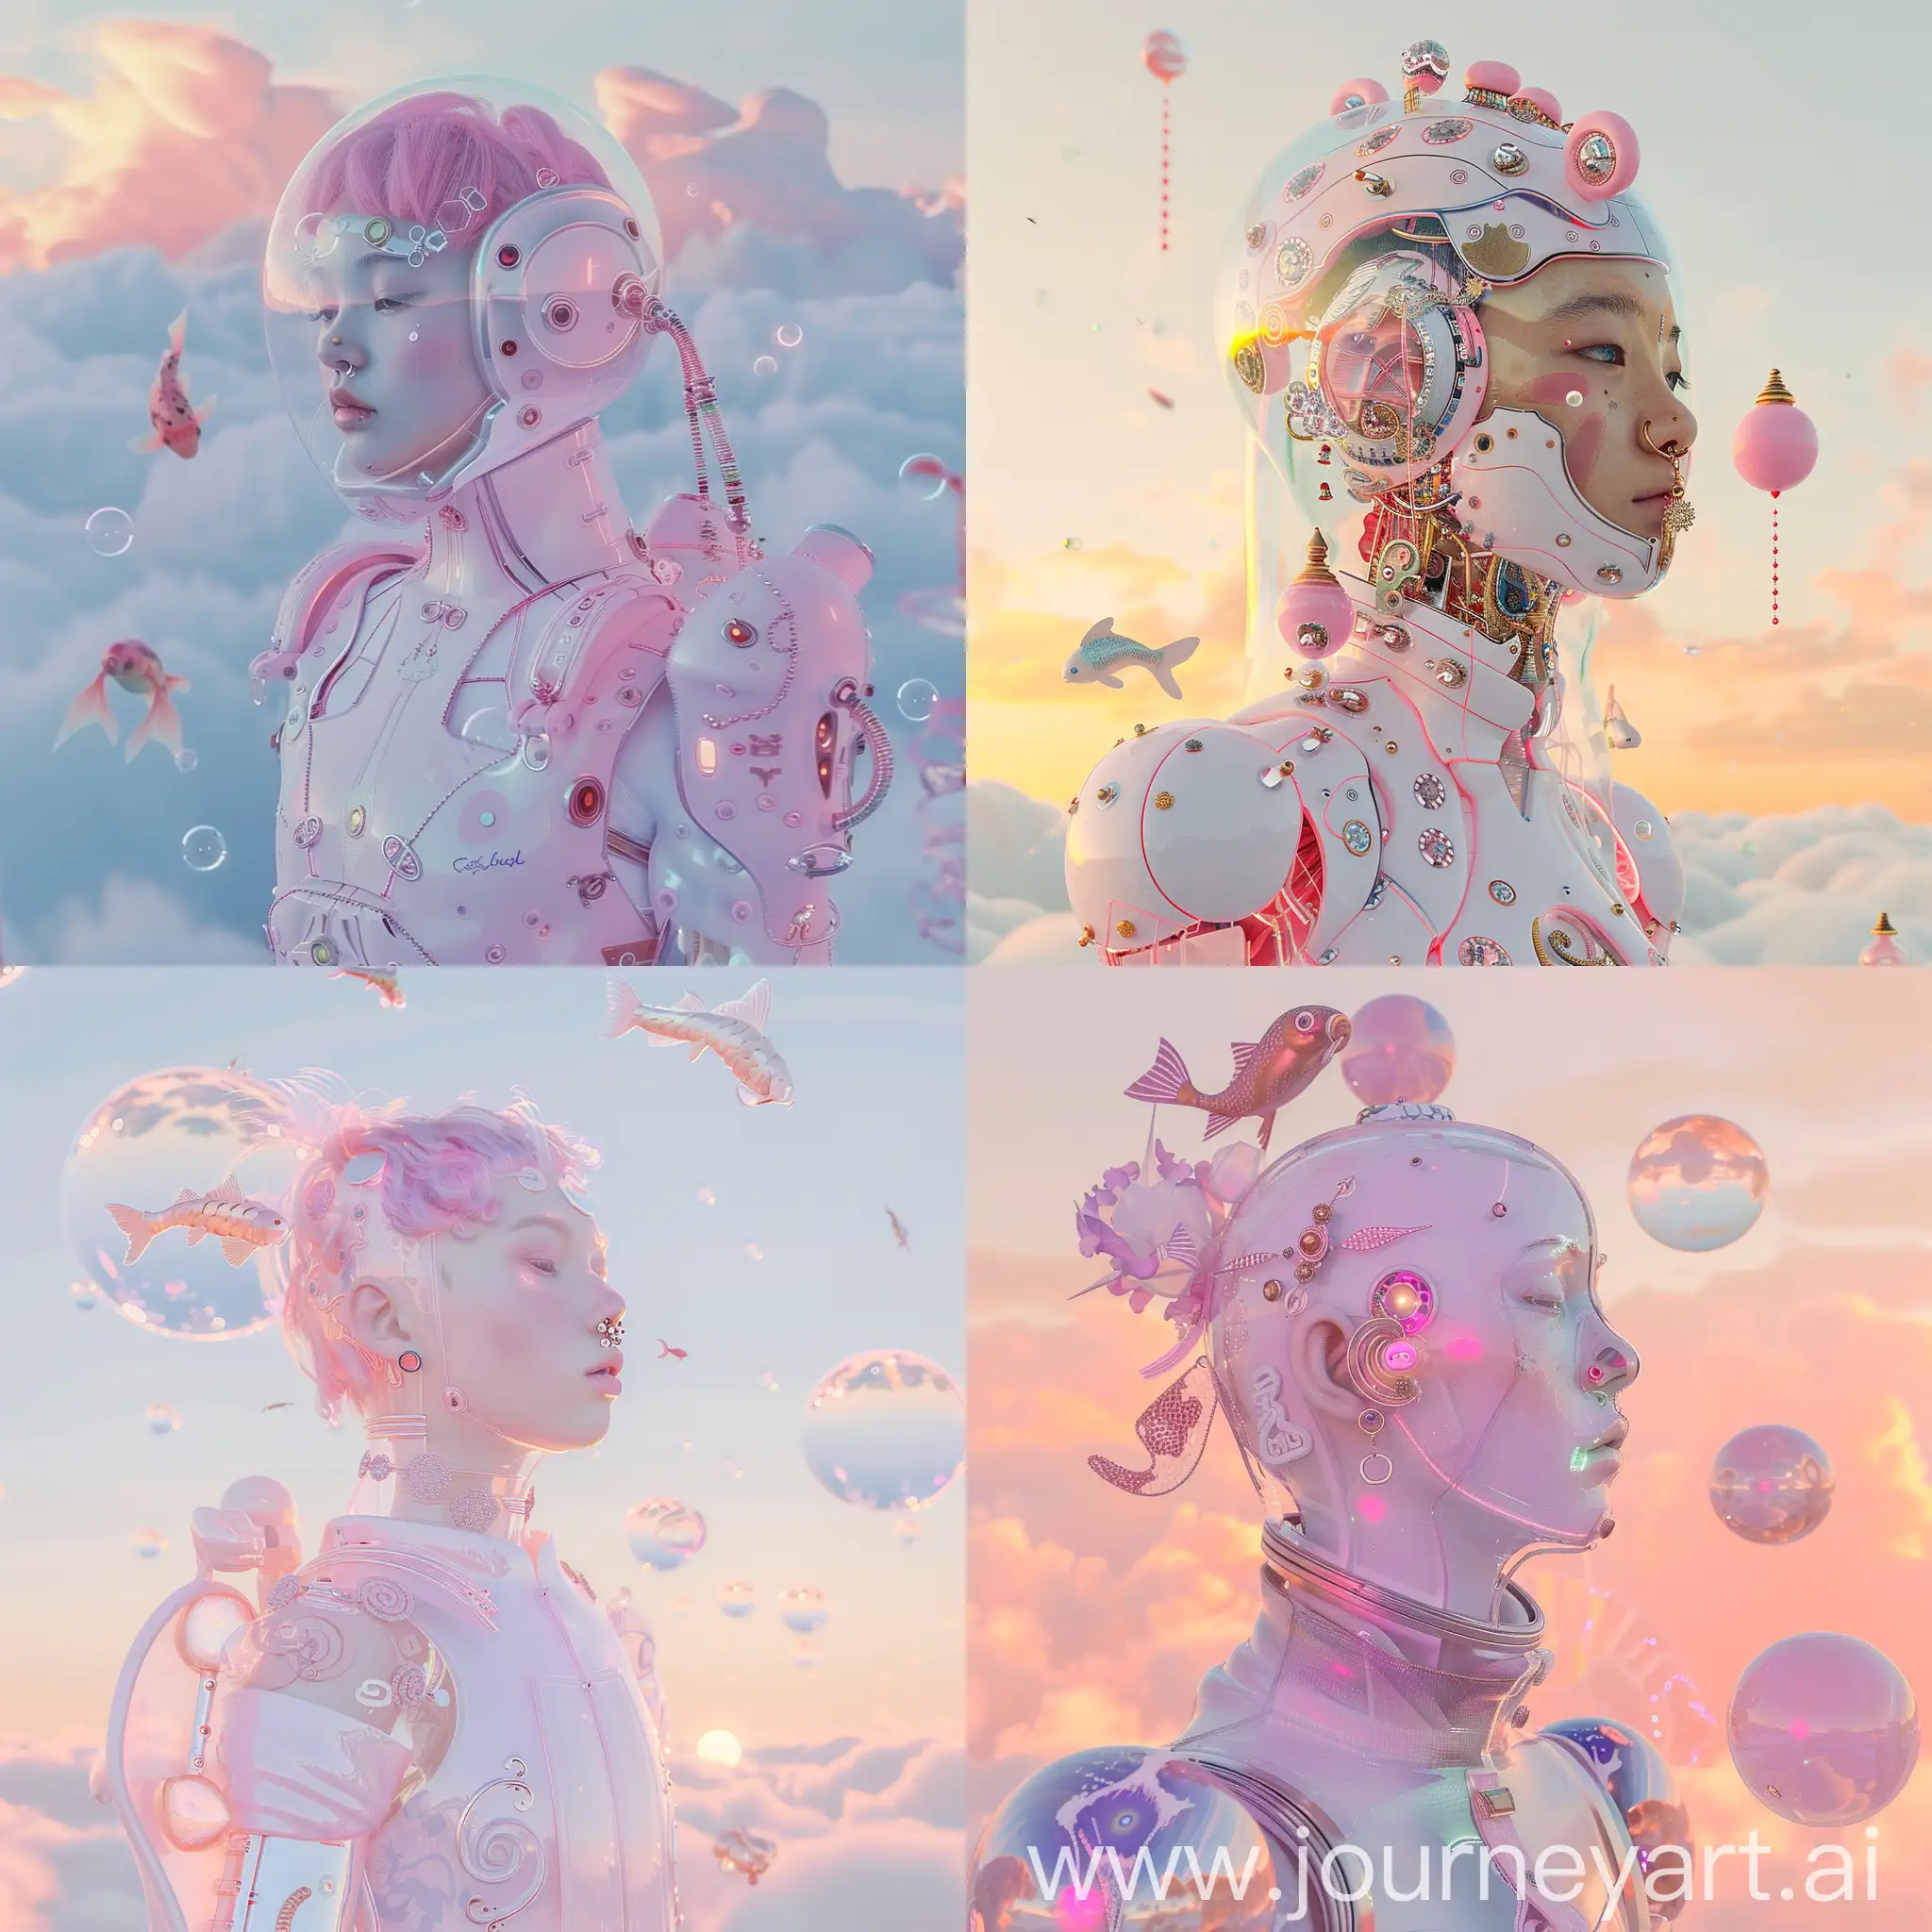 Translucent-Robot-Cyborg-Alien-Girl-in-Pastel-Pink-Spacesuit-at-Sunset